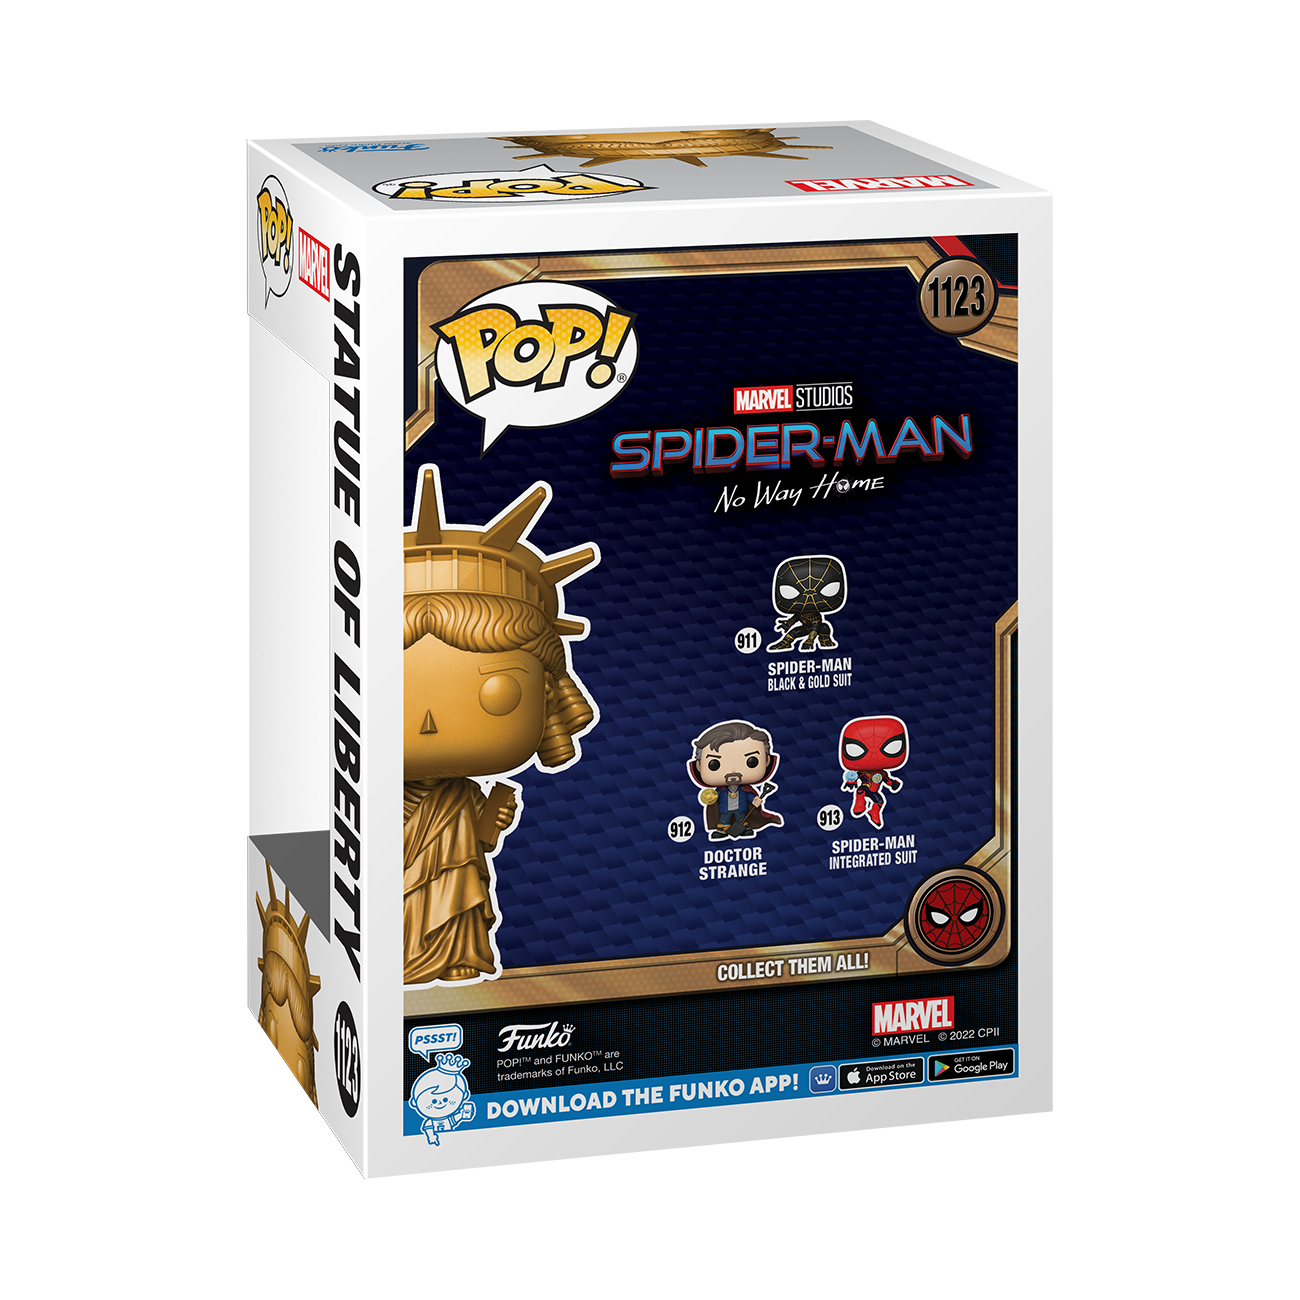 Spiderman: No Way Home - Statue of Liberty - NYCC 2022 Fall Convention Exclusive Pop! Vinyl